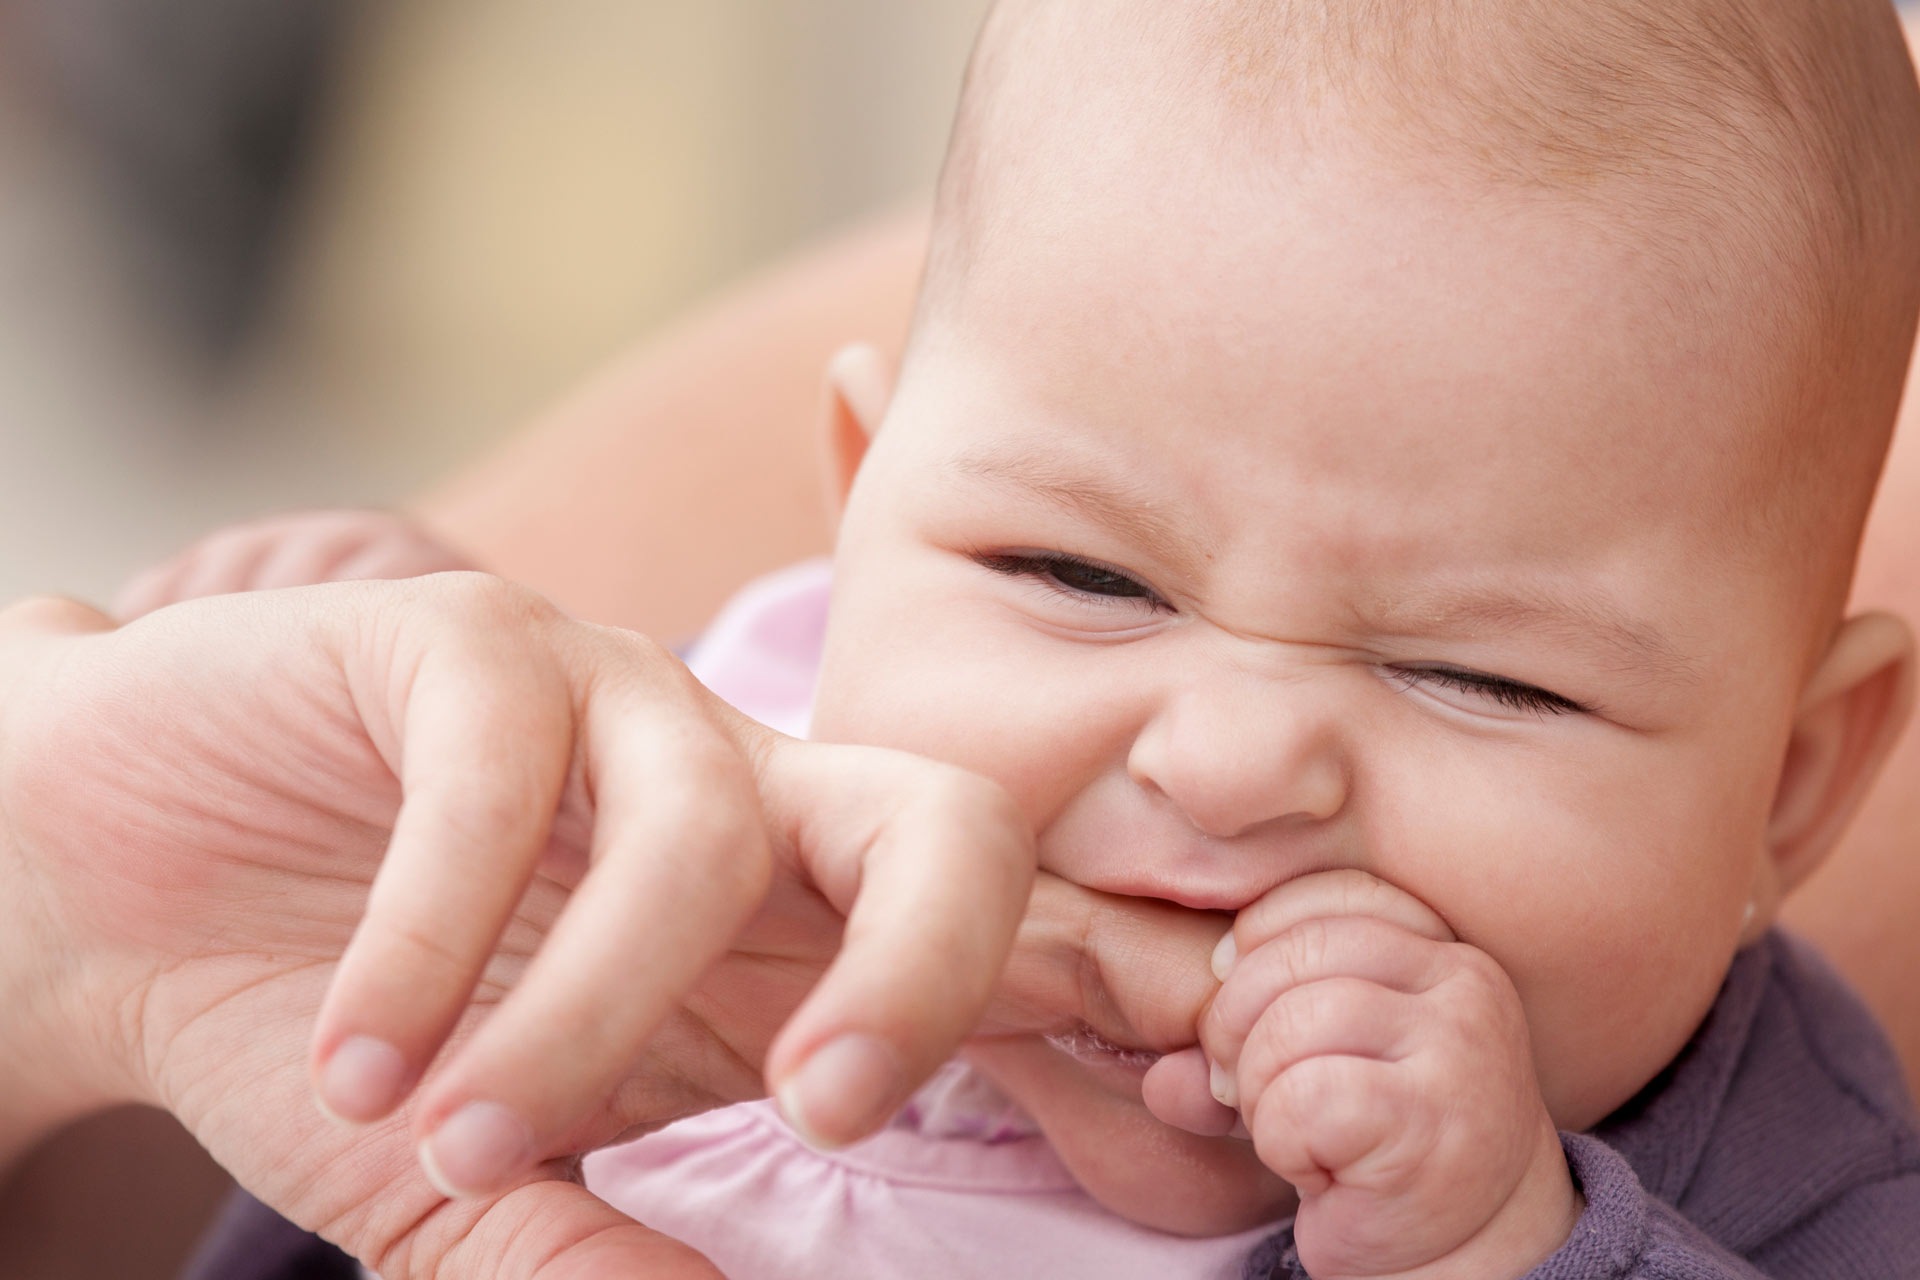 Tips for helping your child during the teething process